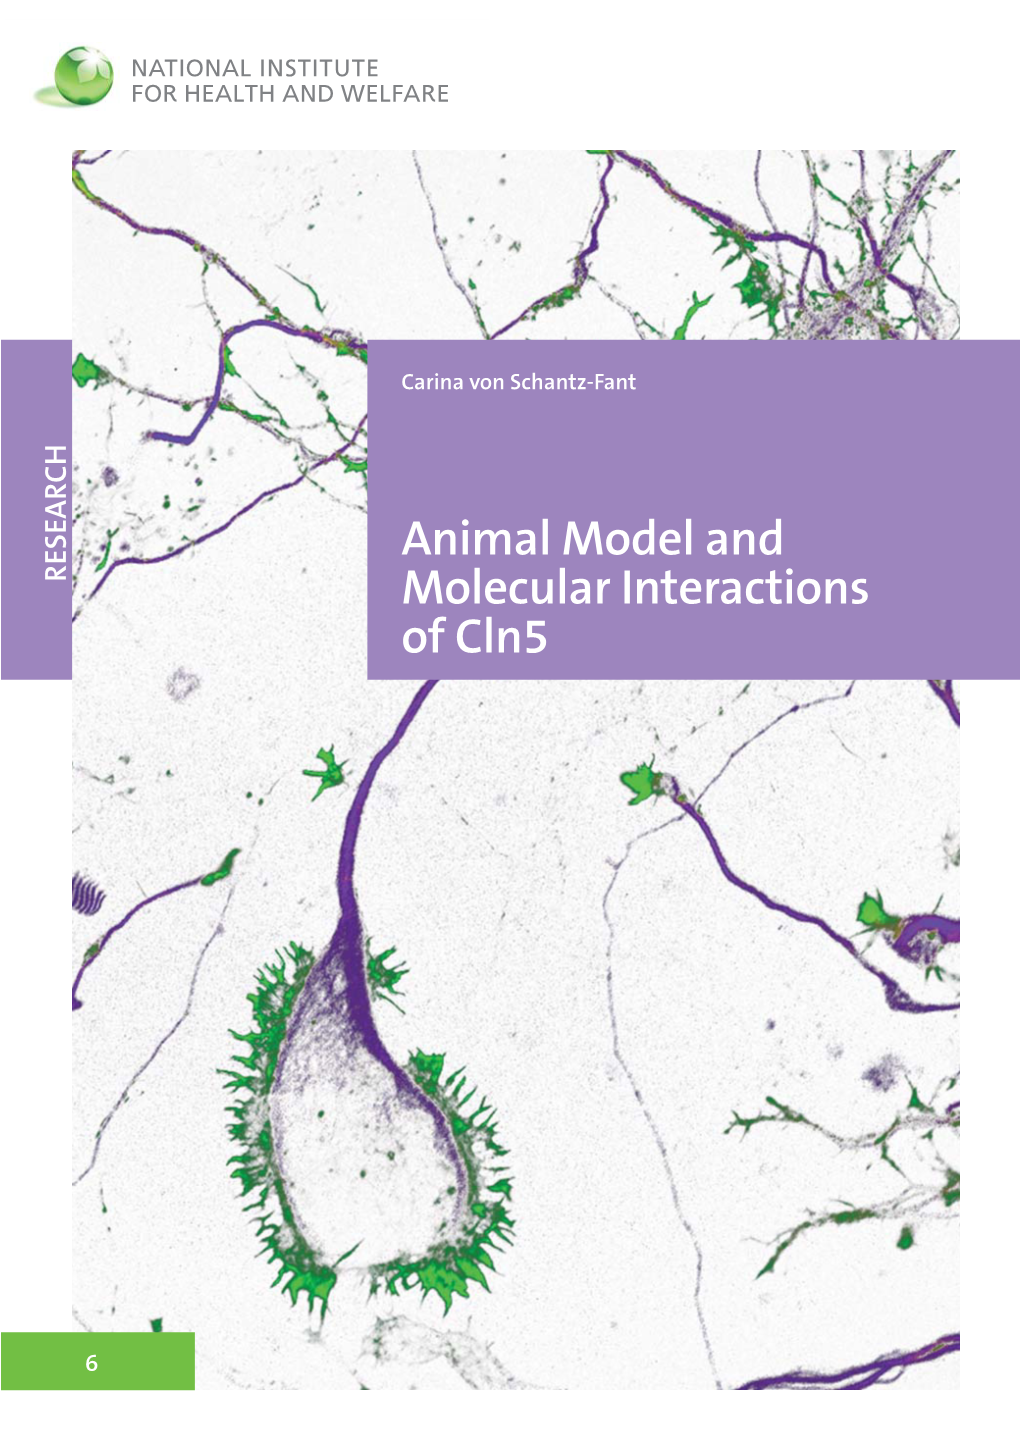 Animal Model and Molecular Interactions of Cln5"